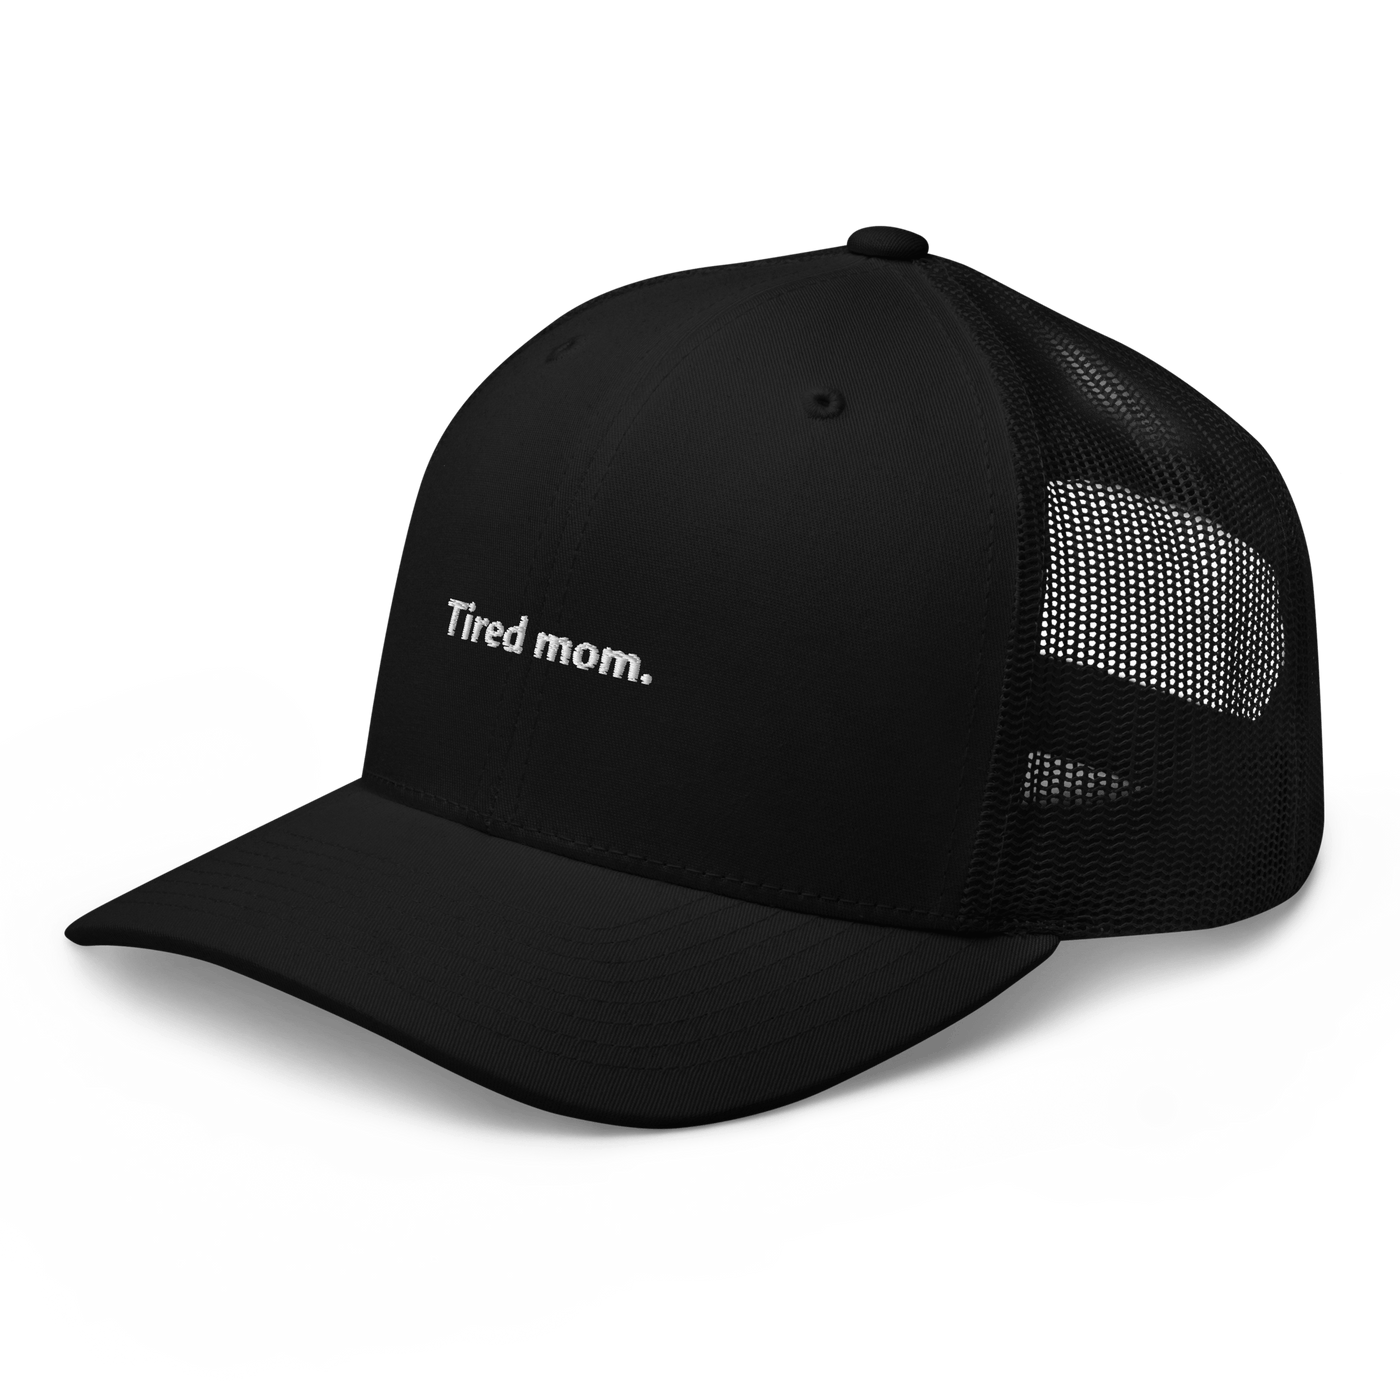 Tired Mom Trucker Cap - Black - - Just Another Cap Store